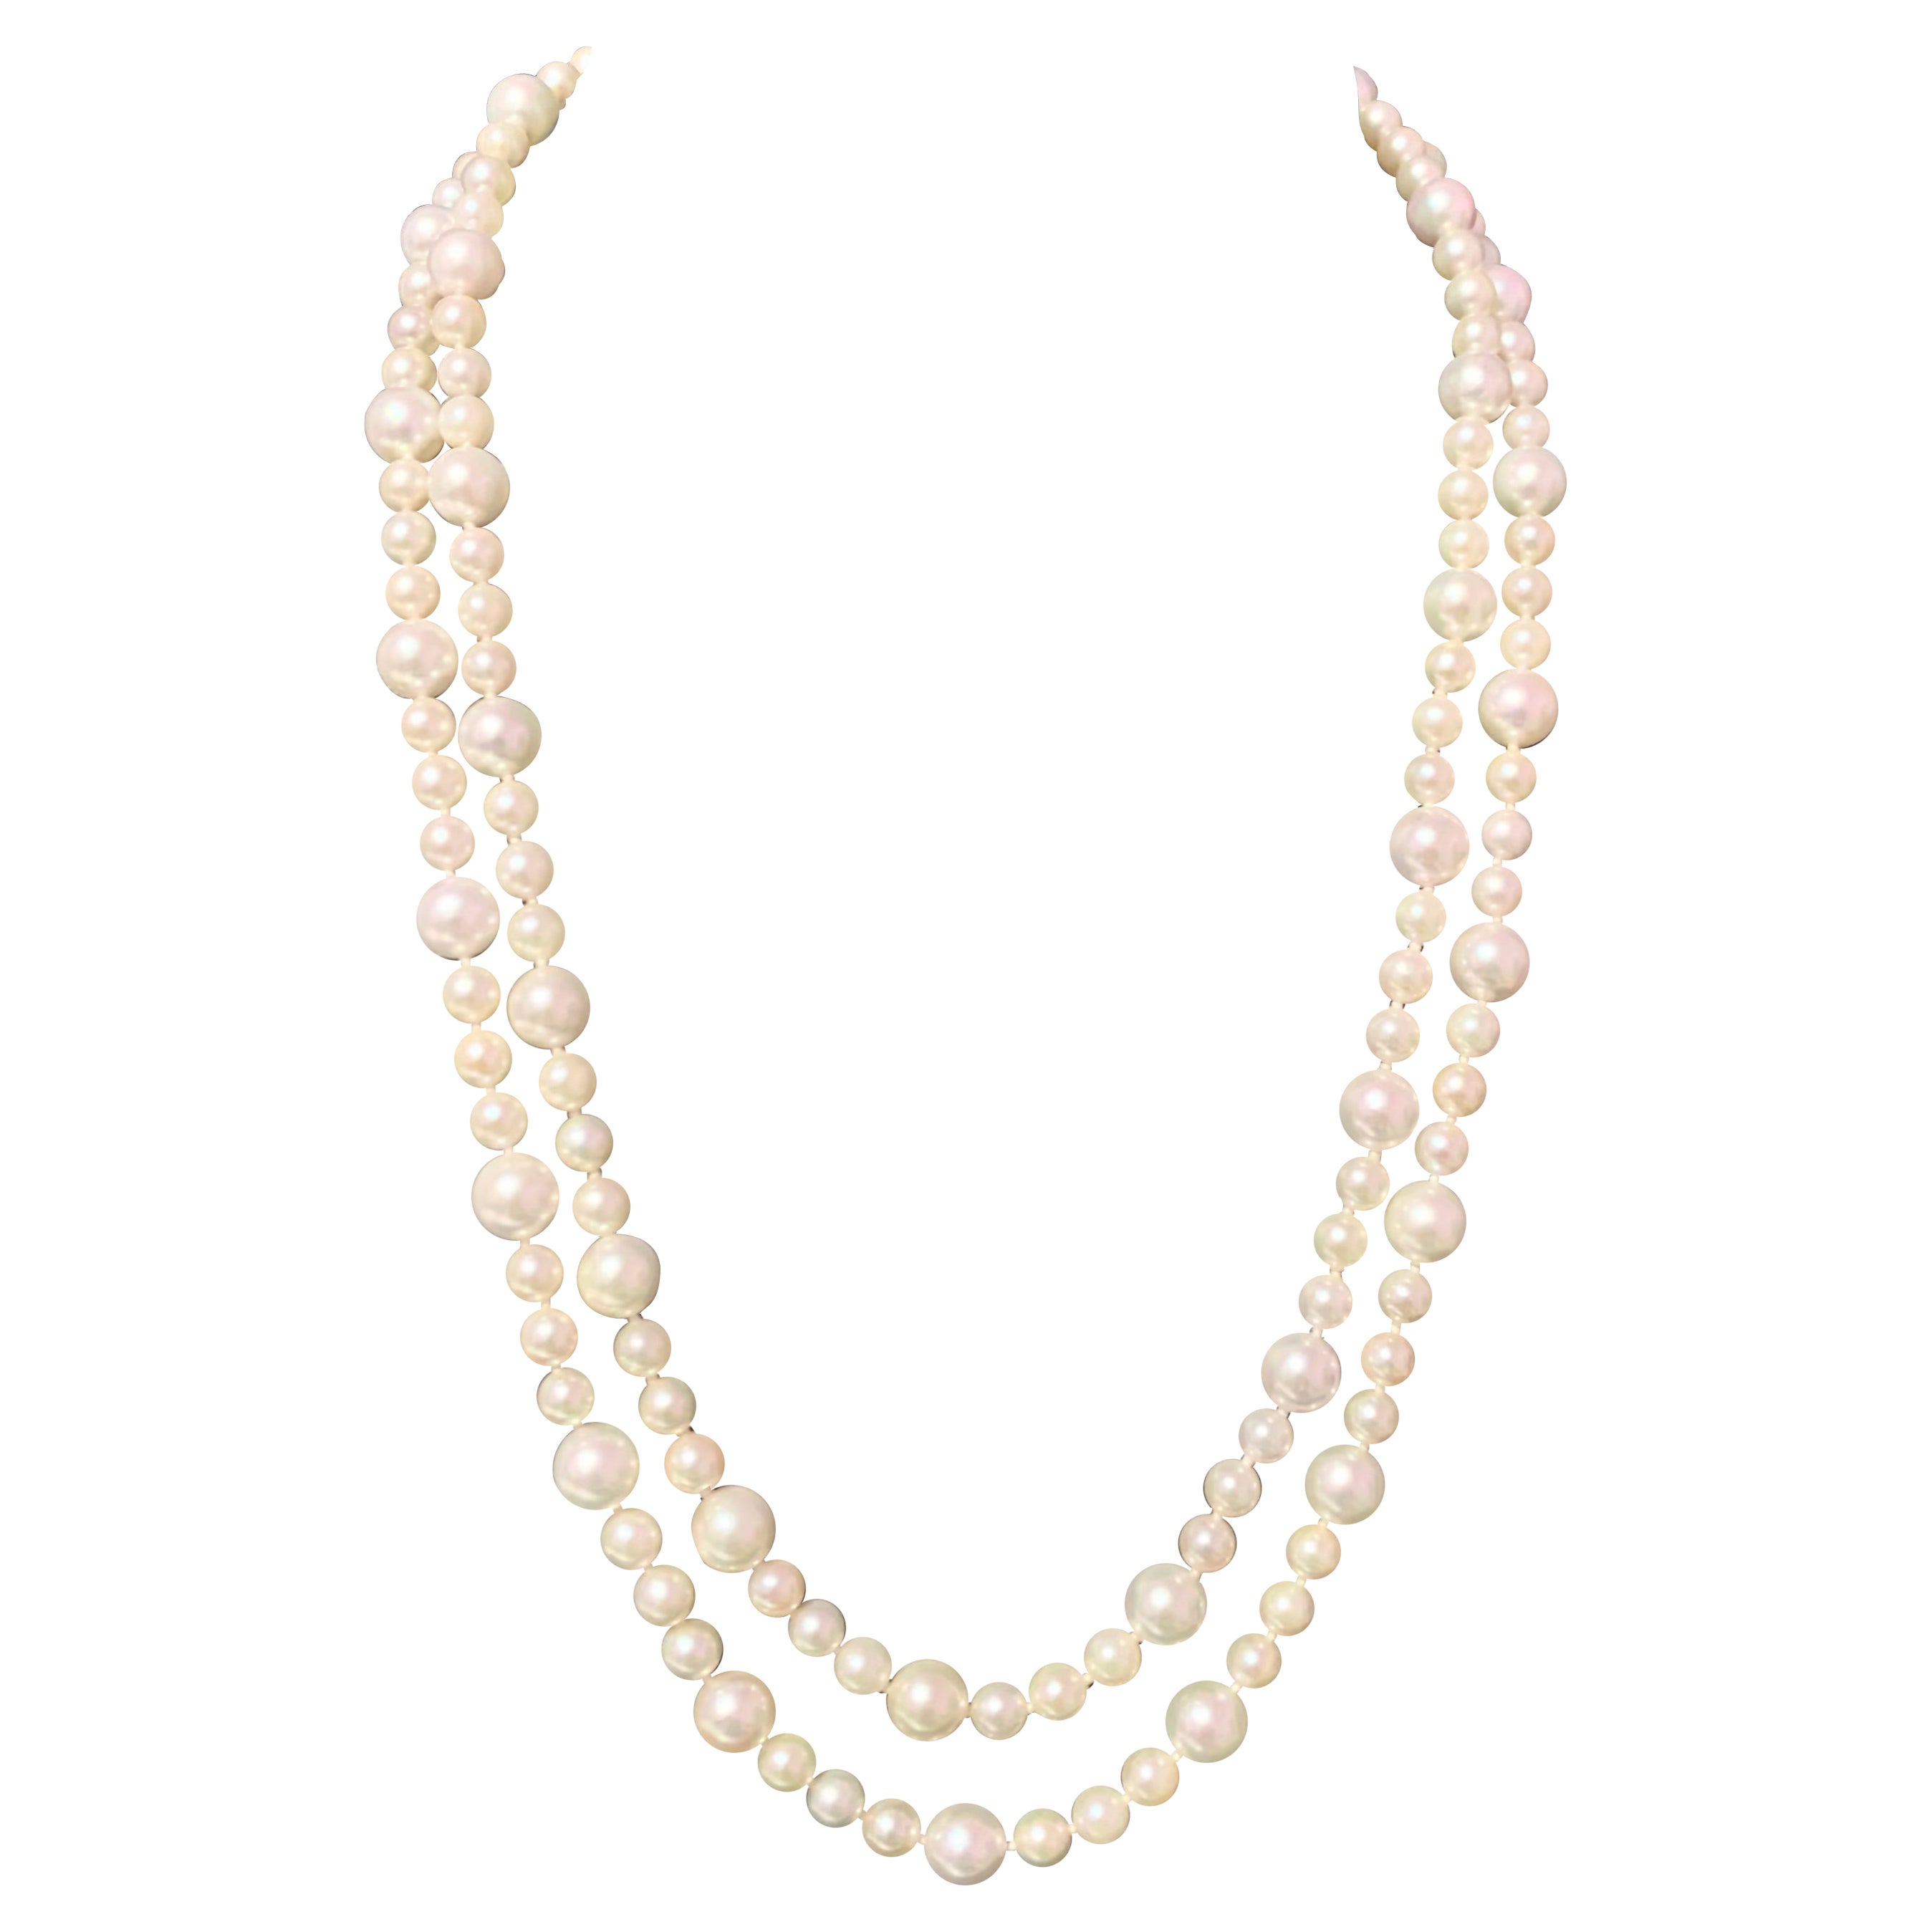 Akoya Pearl Necklace 14k Gold Certified